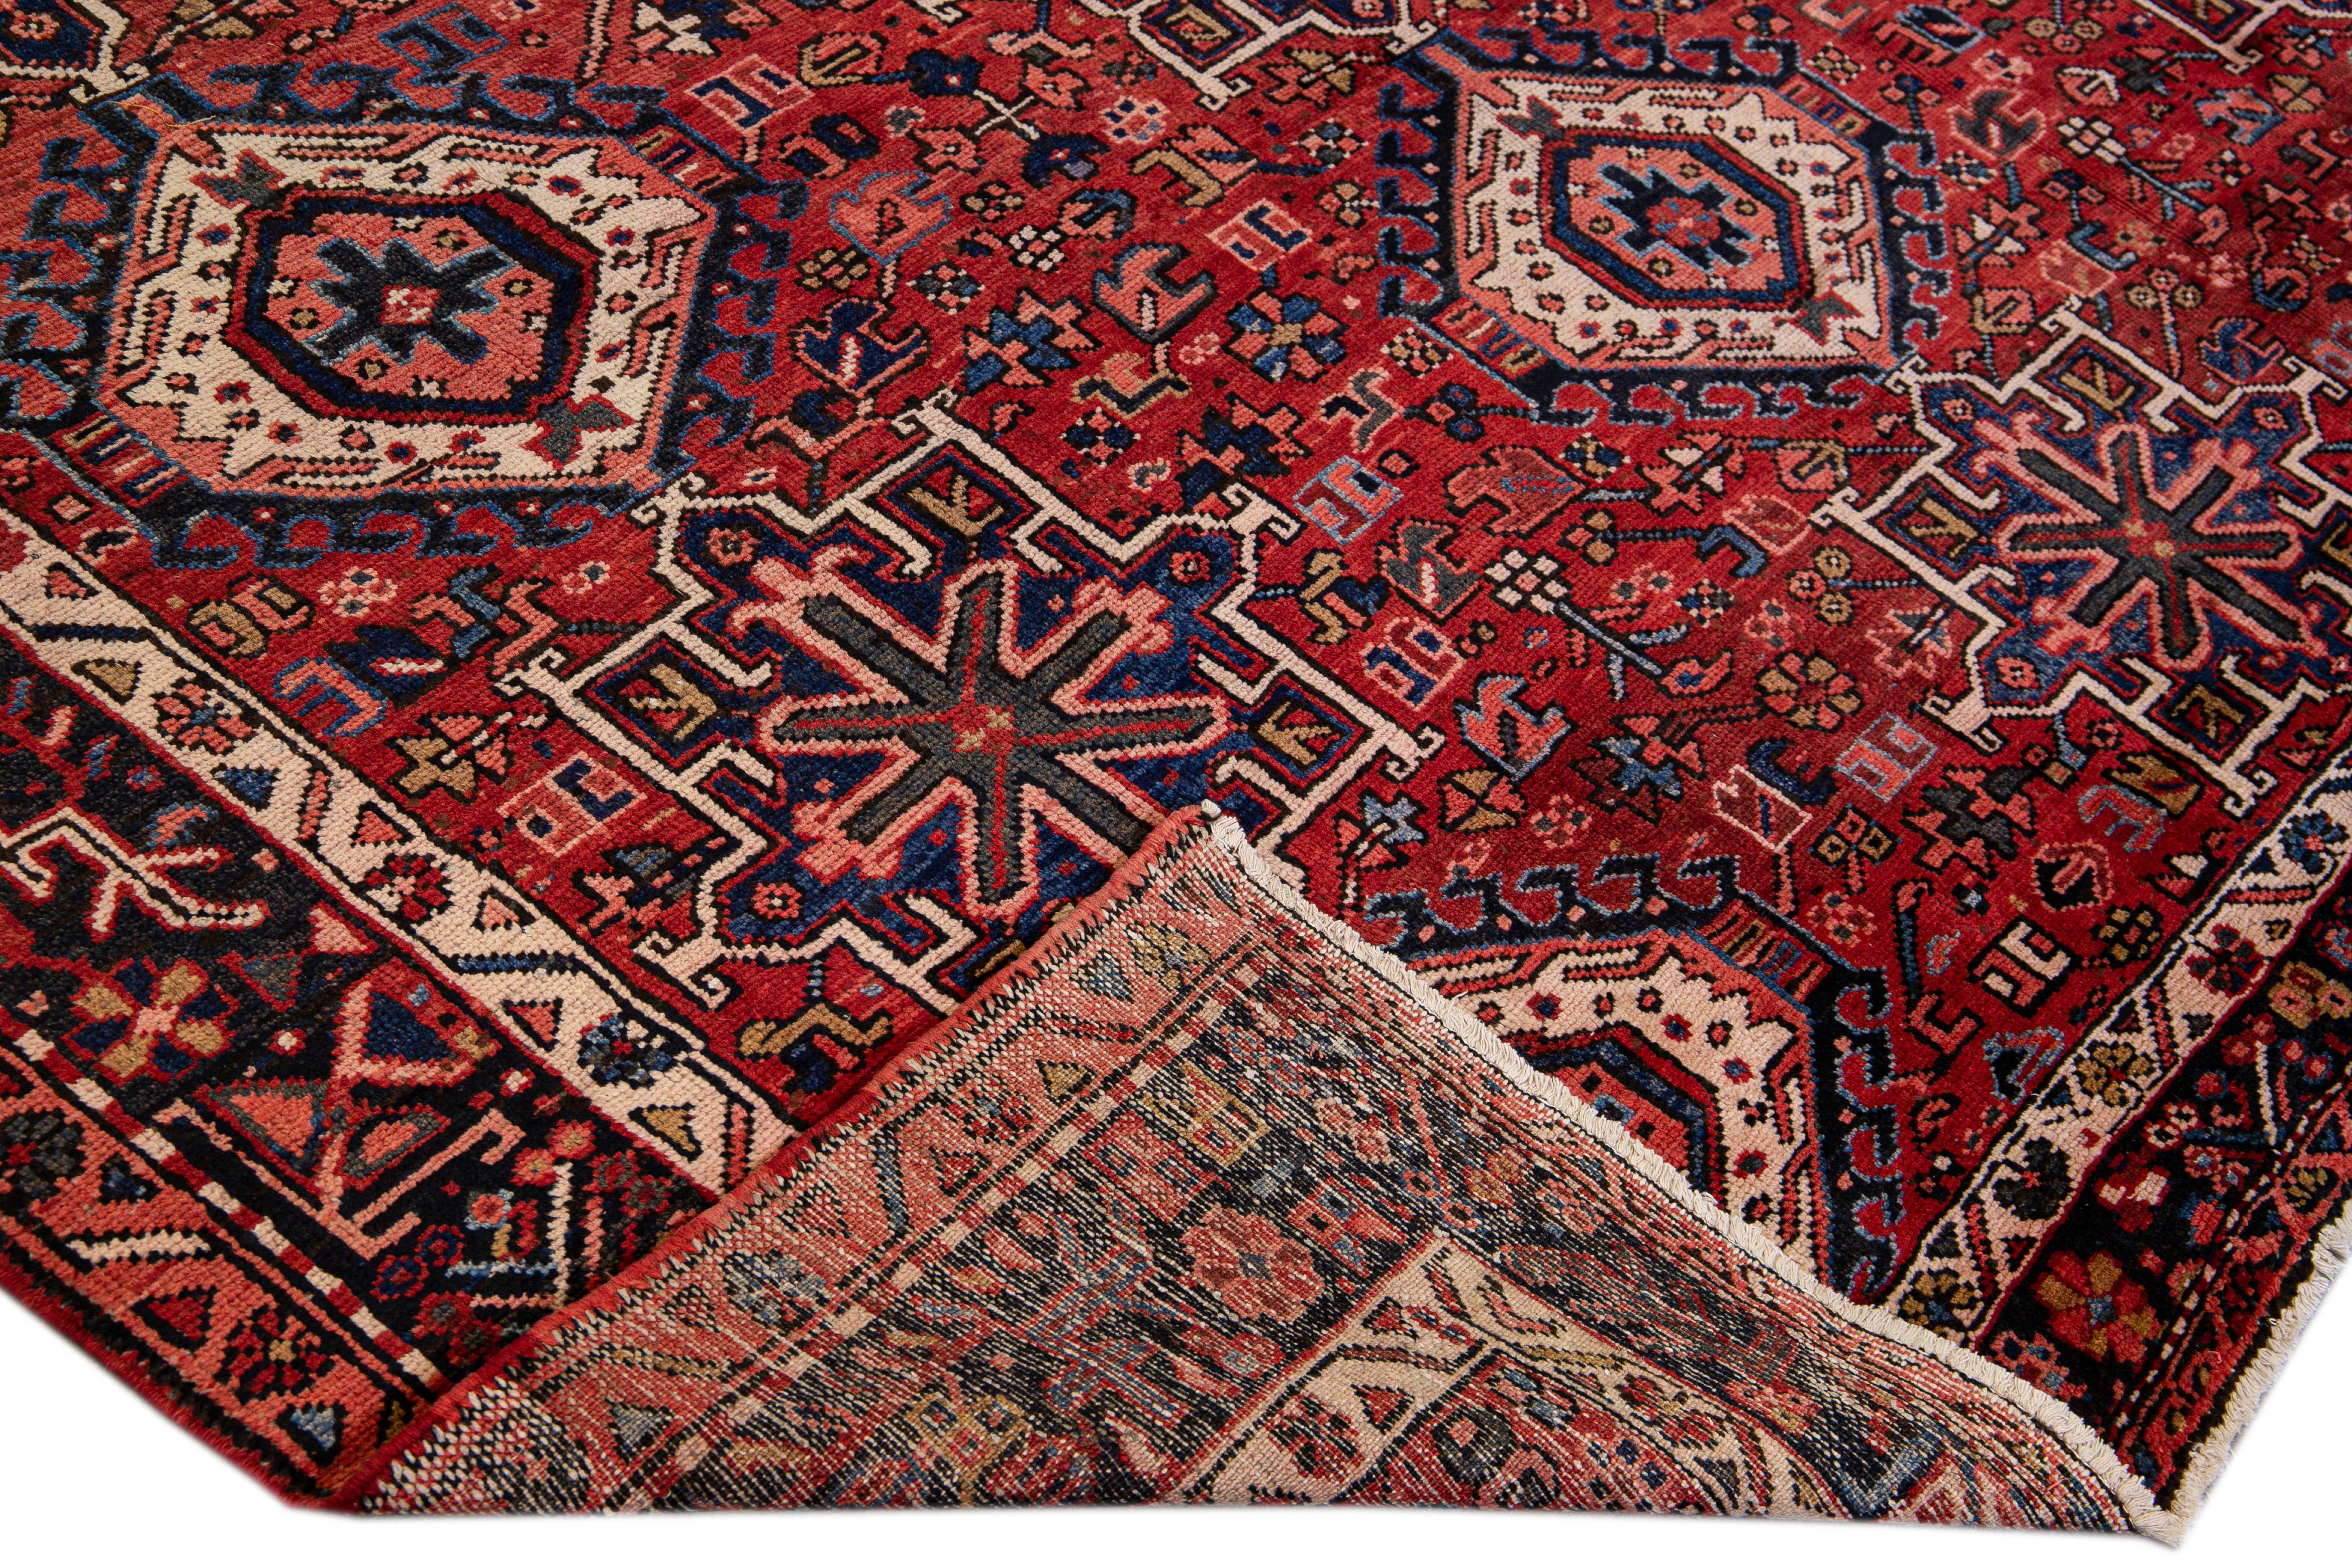 Beautiful antique Heriz hand-knotted wool rug with a red field. This Persian rug has a blue-designed frame and multicolor accents in an all-over gorgeous geometric medallion floral motif.

This rug measures: 8'10